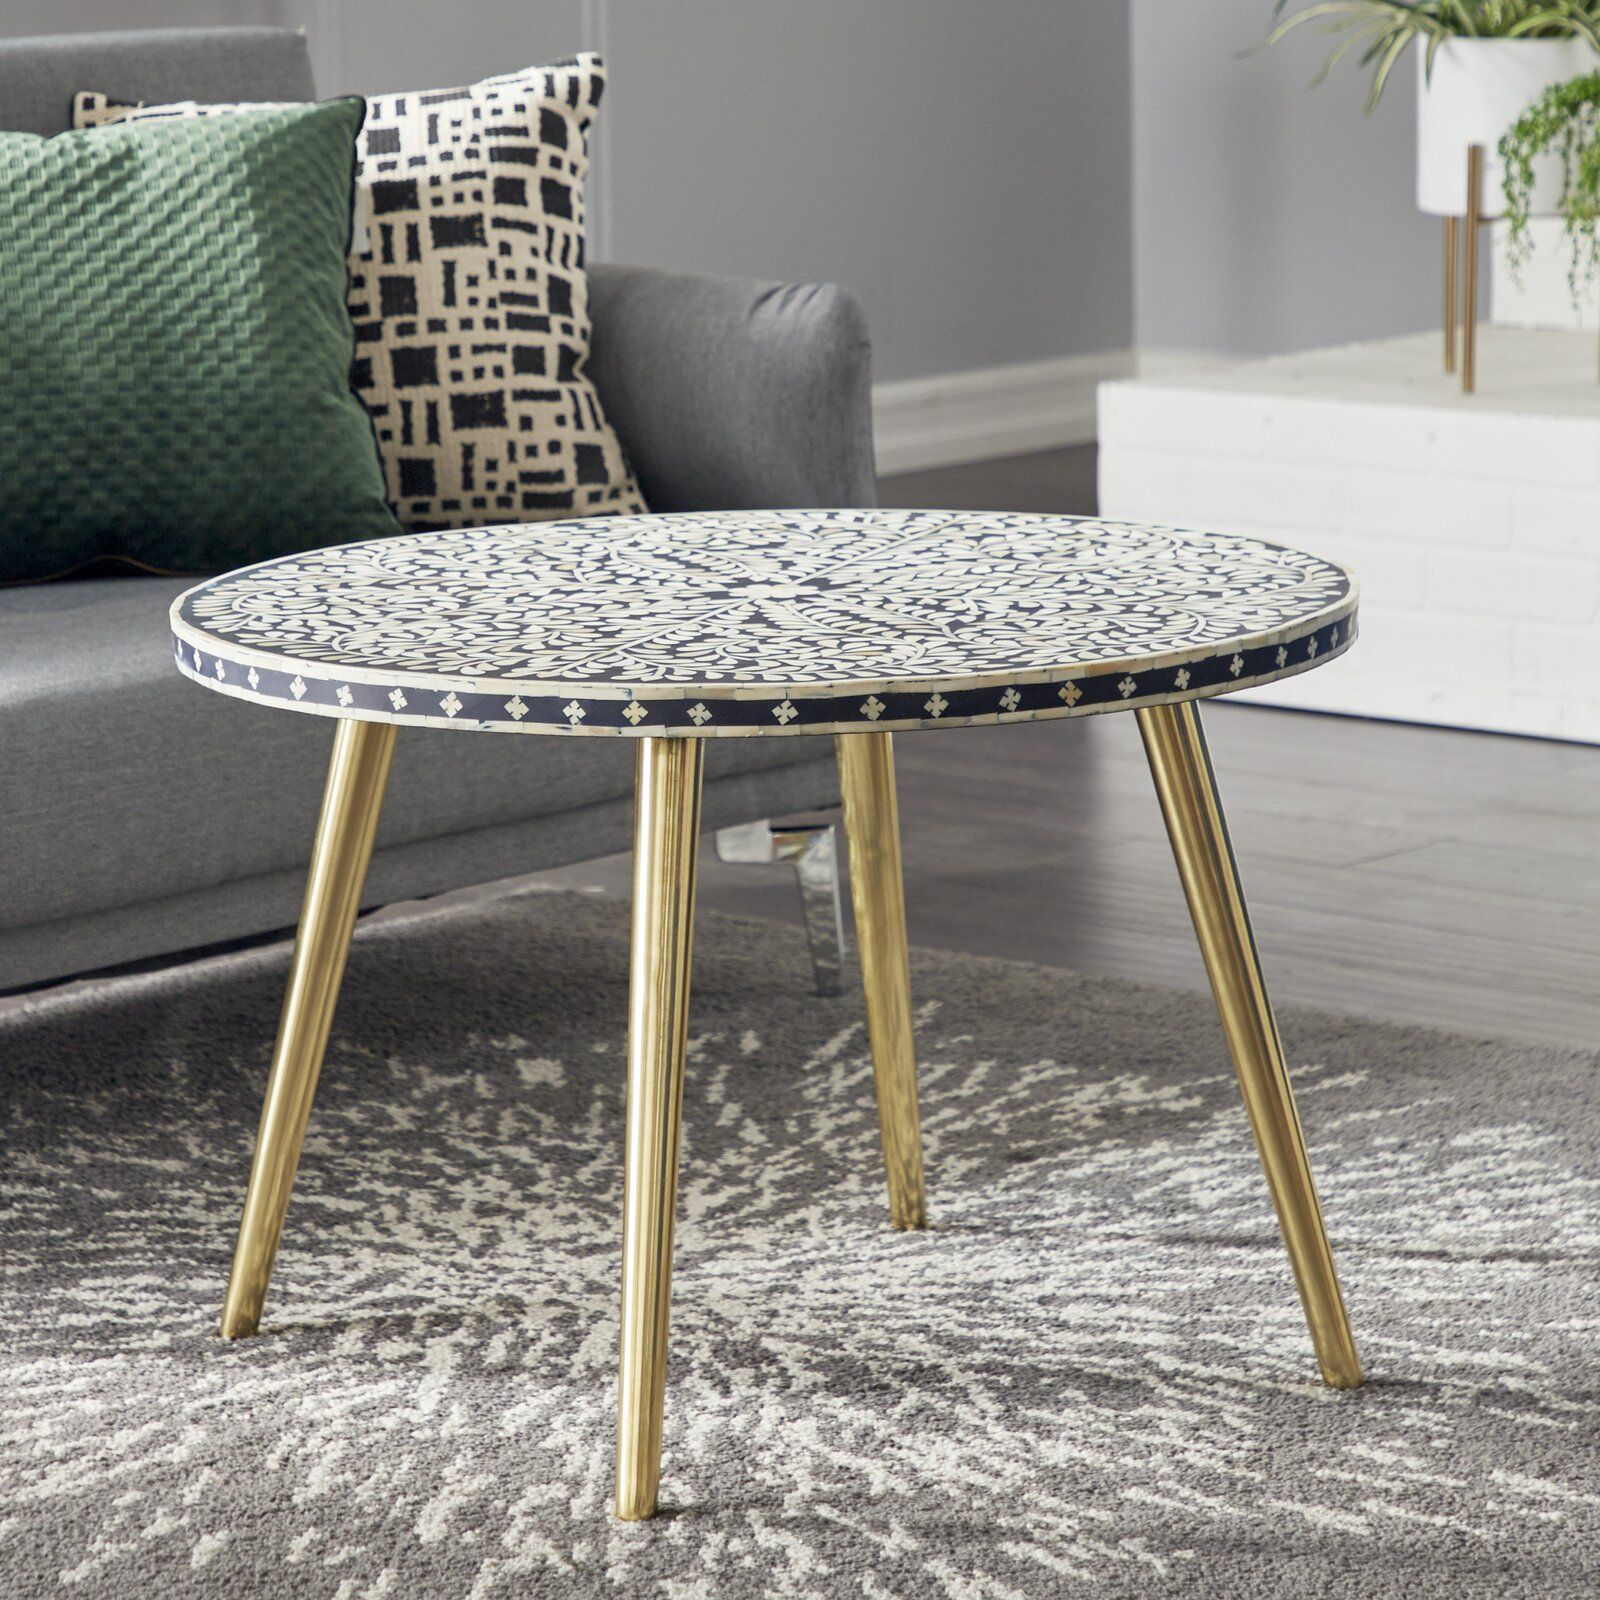 Estey Coffee Table, Top Material: Manufactured Wood, Features Shell Inlays  In Swirling Leaves Flourish On The Smooth Black Wooden Tabletop, And  Supported4 Splayed Tapered Legs In A Metal – Walmart Intended For Splayed Metal Legs Coffee Tables (View 8 of 15)